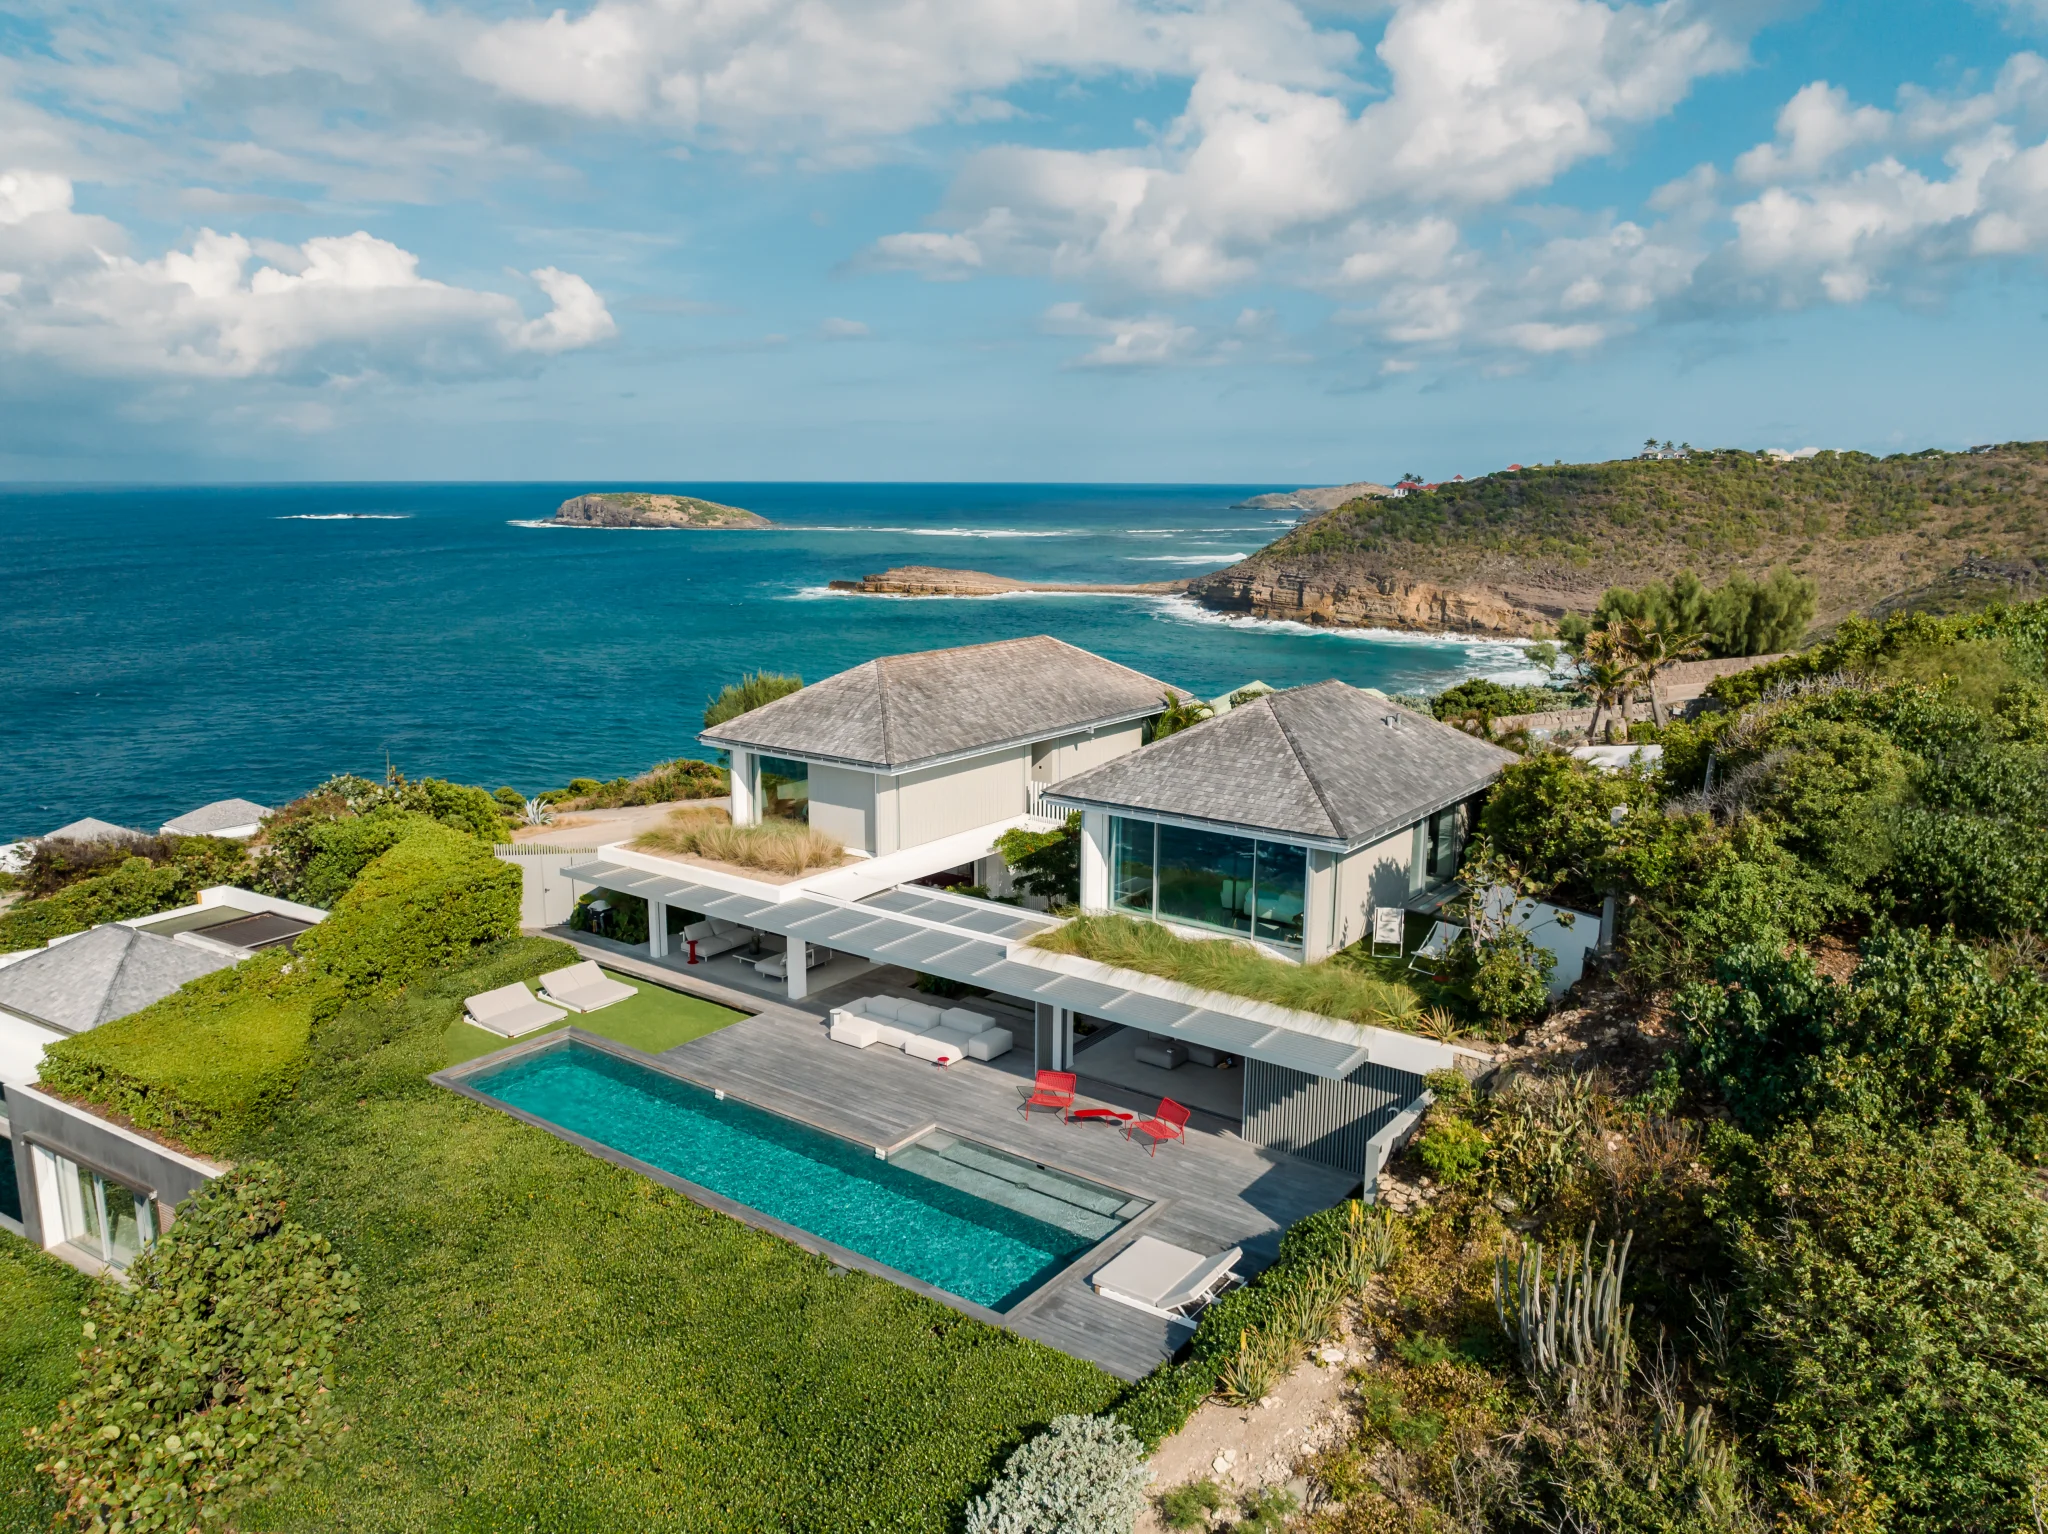 With its tranquil indoor-outdoor living spaces, infinity-edge pool, and Zen-like gardens, Villa CEO is the perfect escape with a 290-degree view of the Atlantic Ocean and the island of St. Martin.